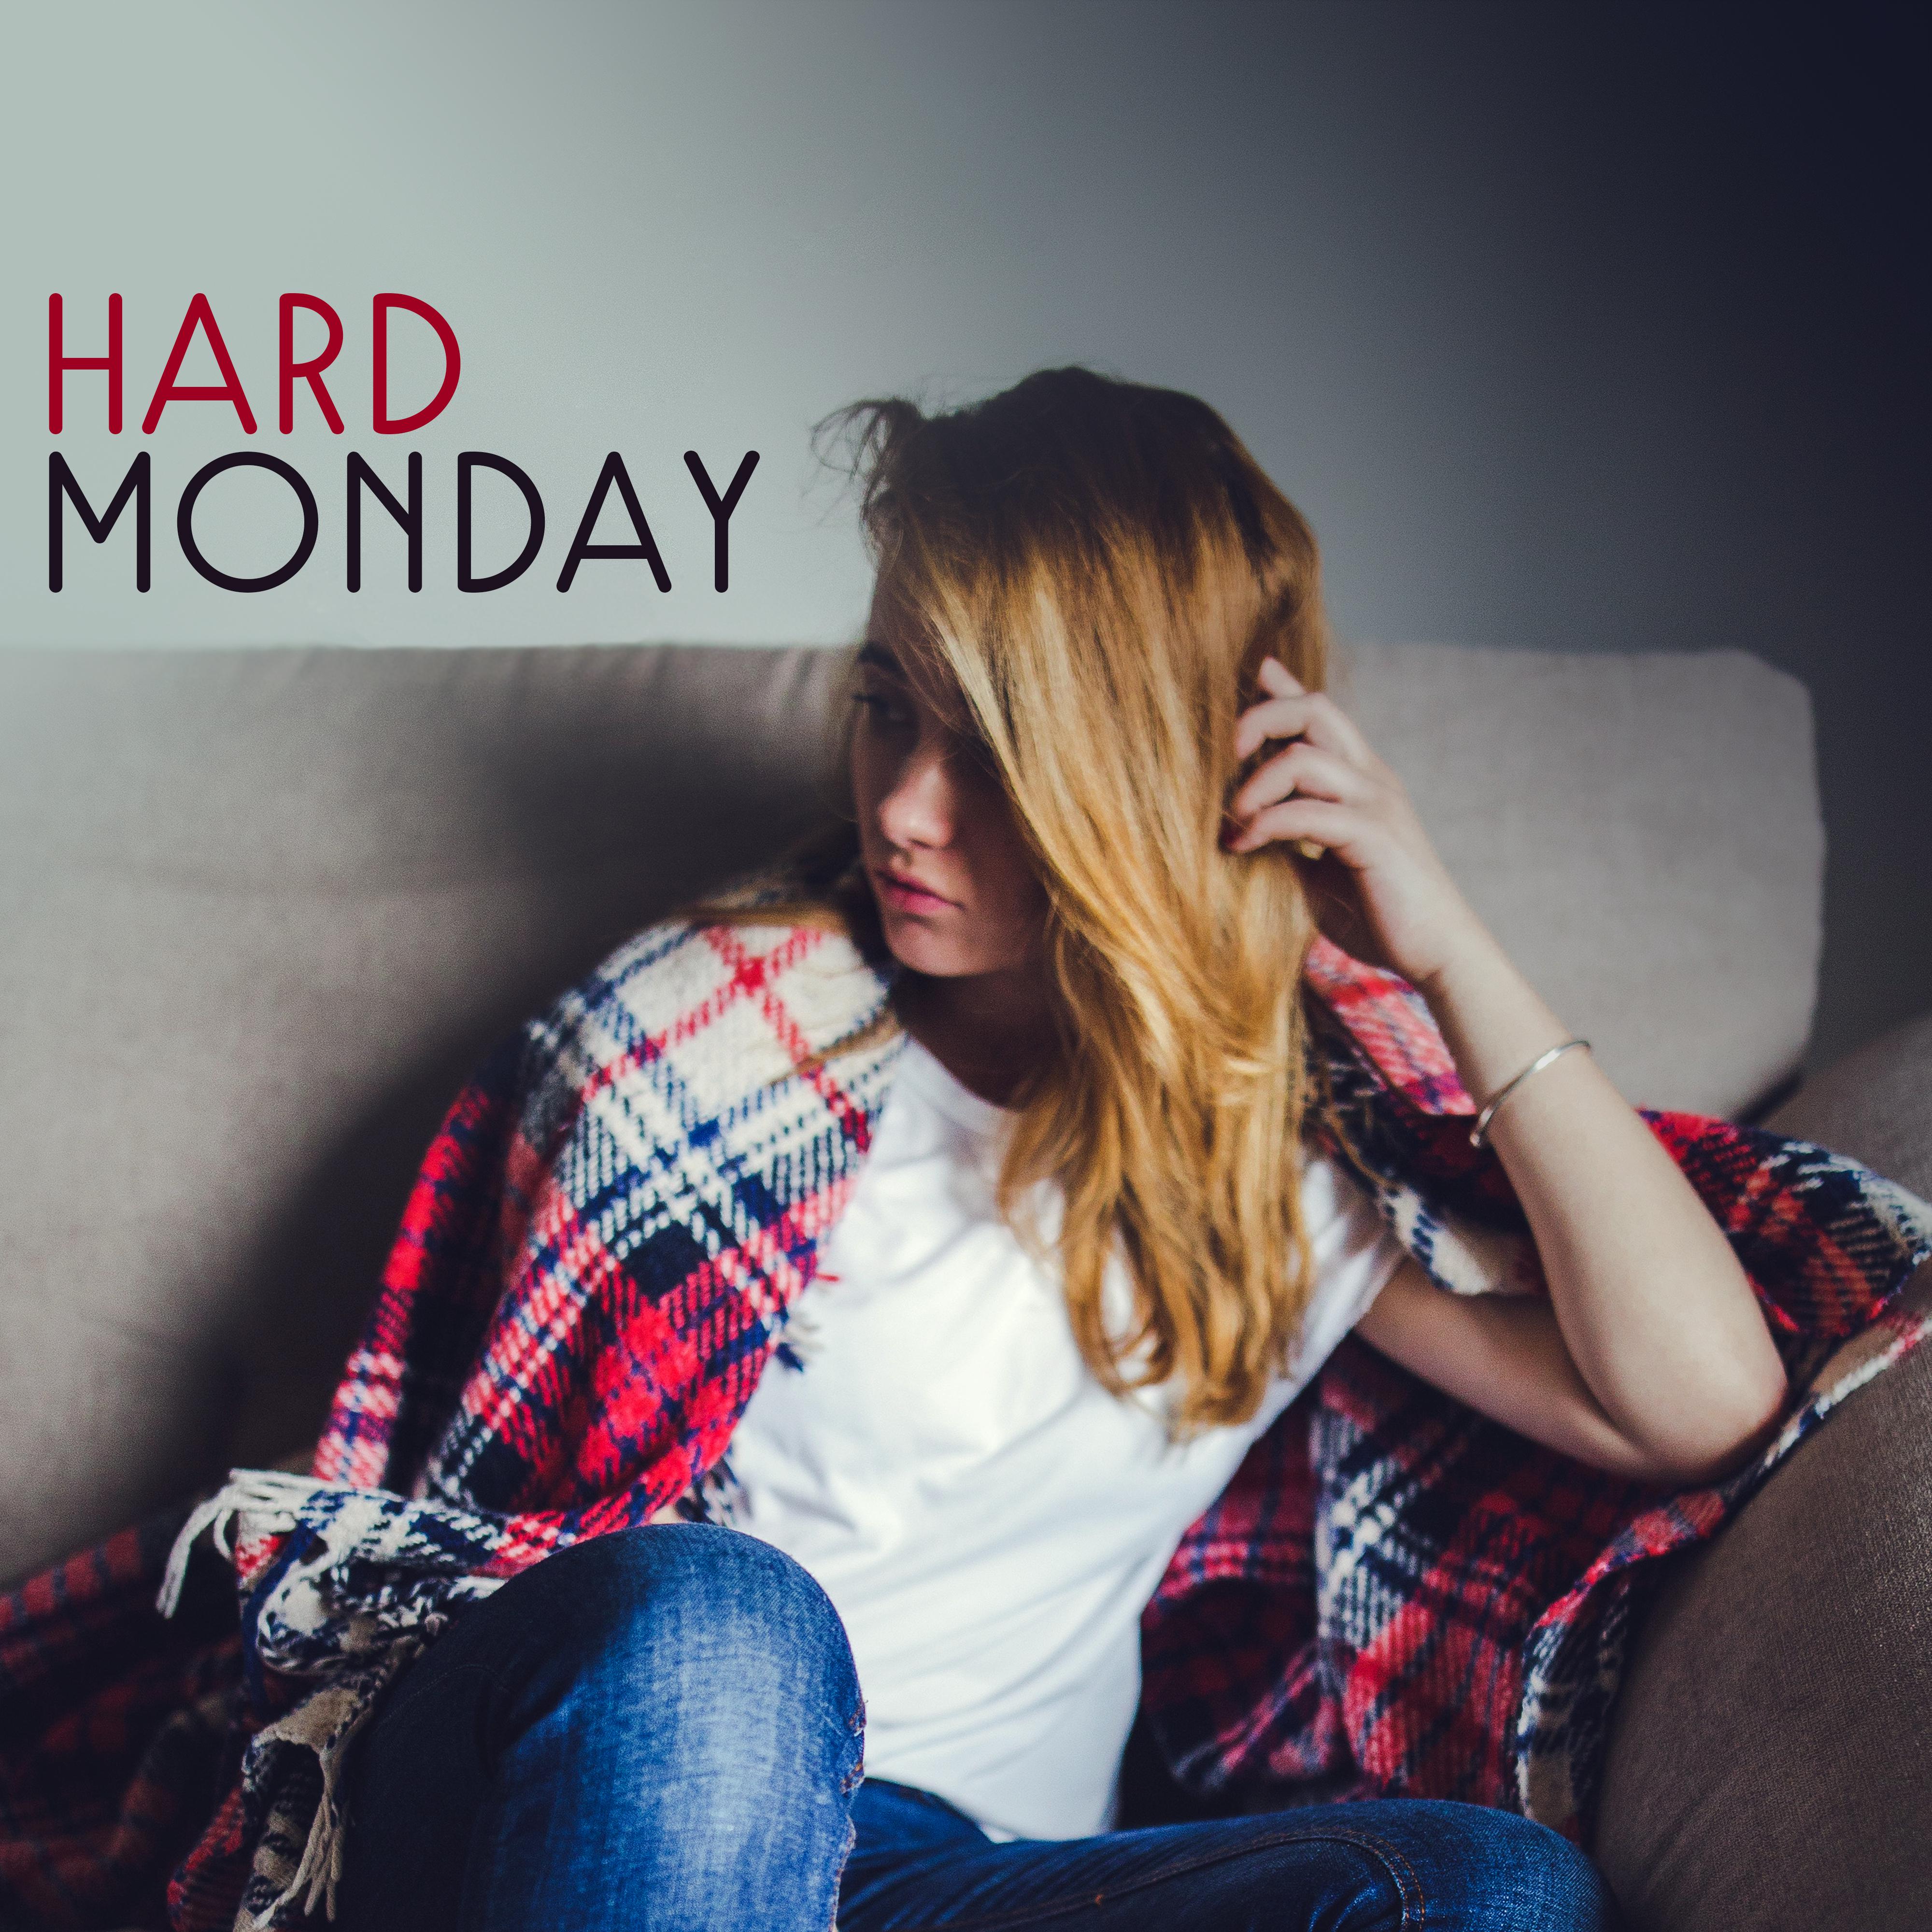 Hard Monday – Relaxing Nature Music for Monday, Relax Before Work, Nature Sounds, Help for Deep Relaxation